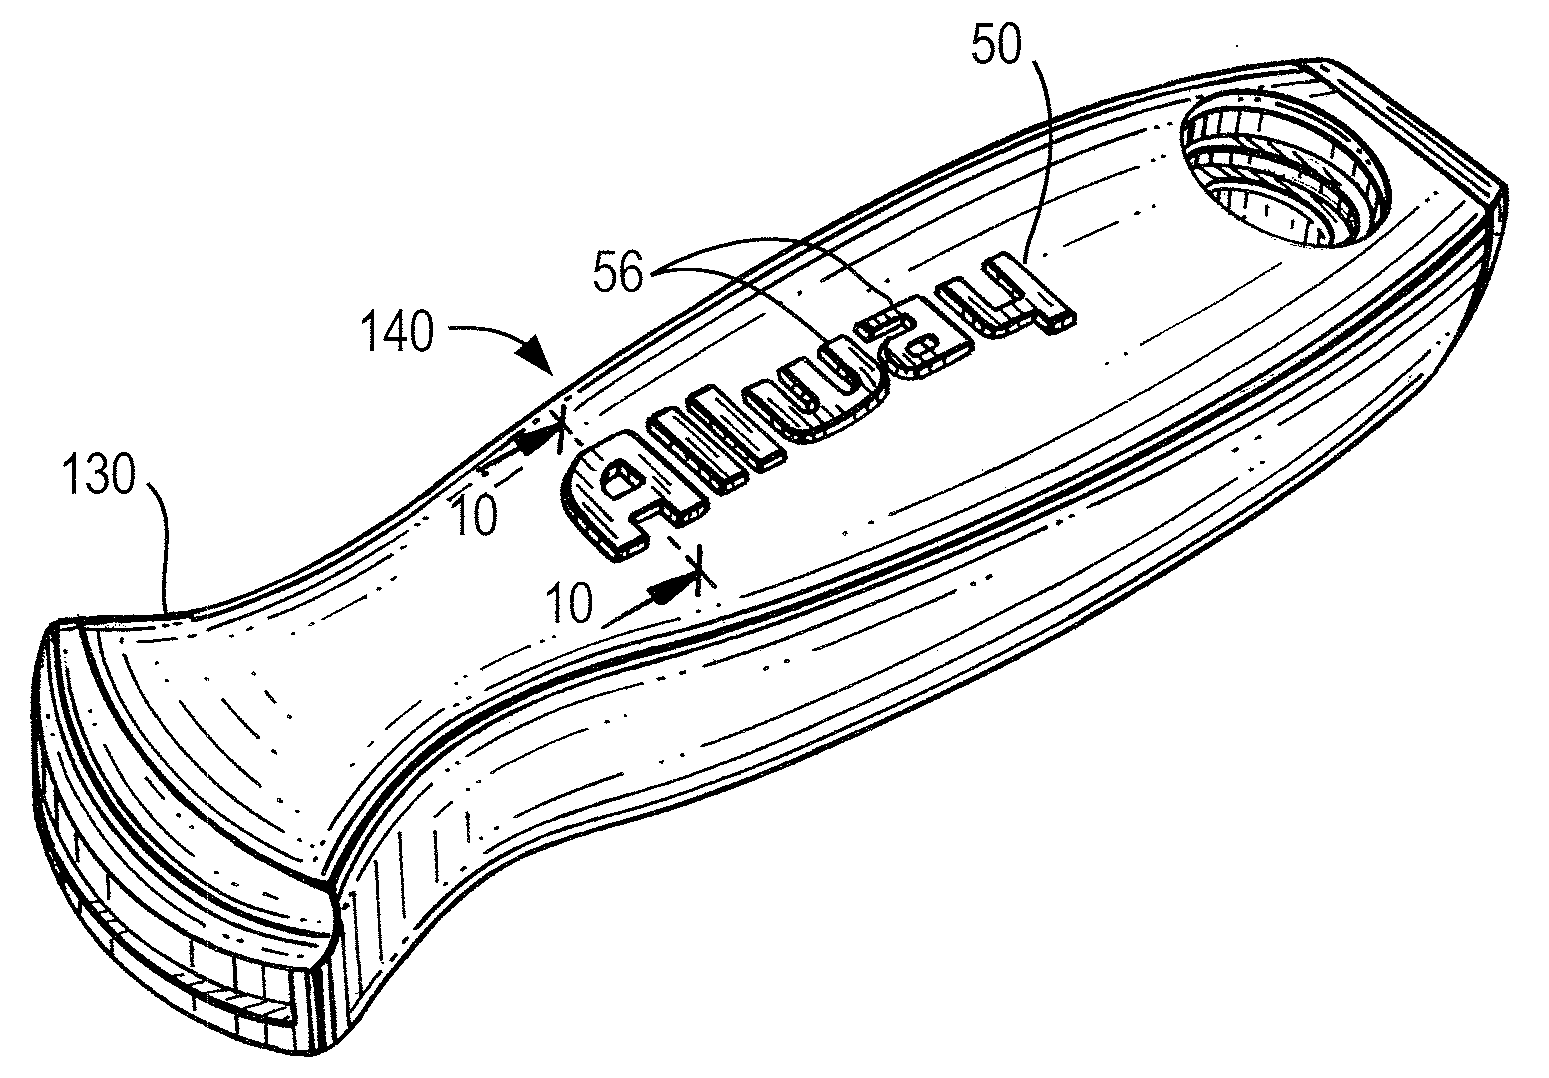 Method of dual molding products with logos and other indicia